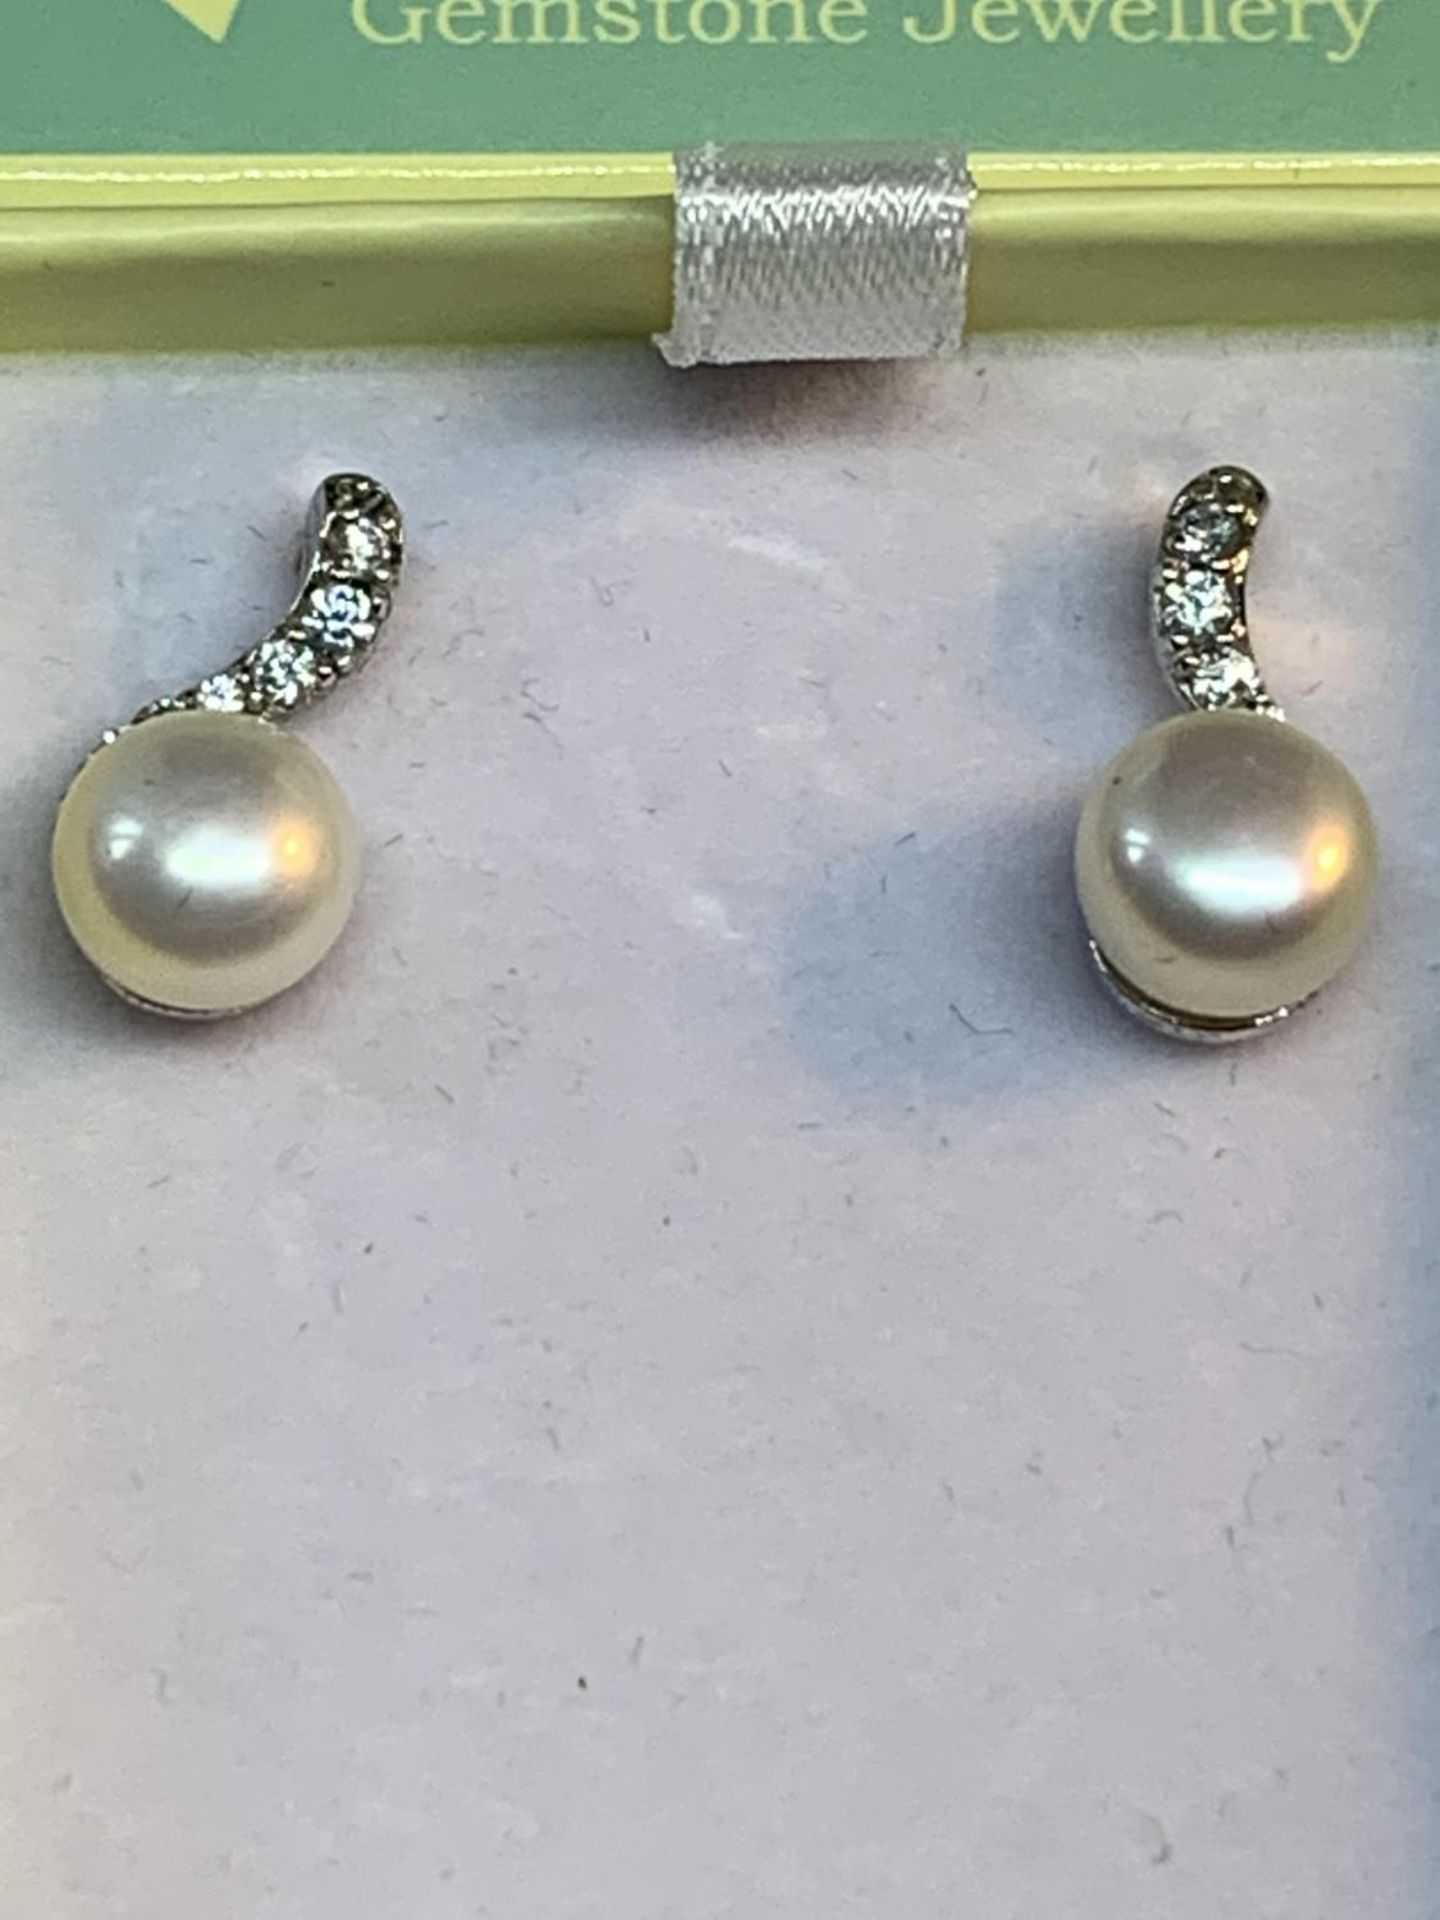 A APIR OF SILVER AND PEARL EARRINGS AND A PANDORA NECKLACE WITH HEART CHARM - Image 2 of 4